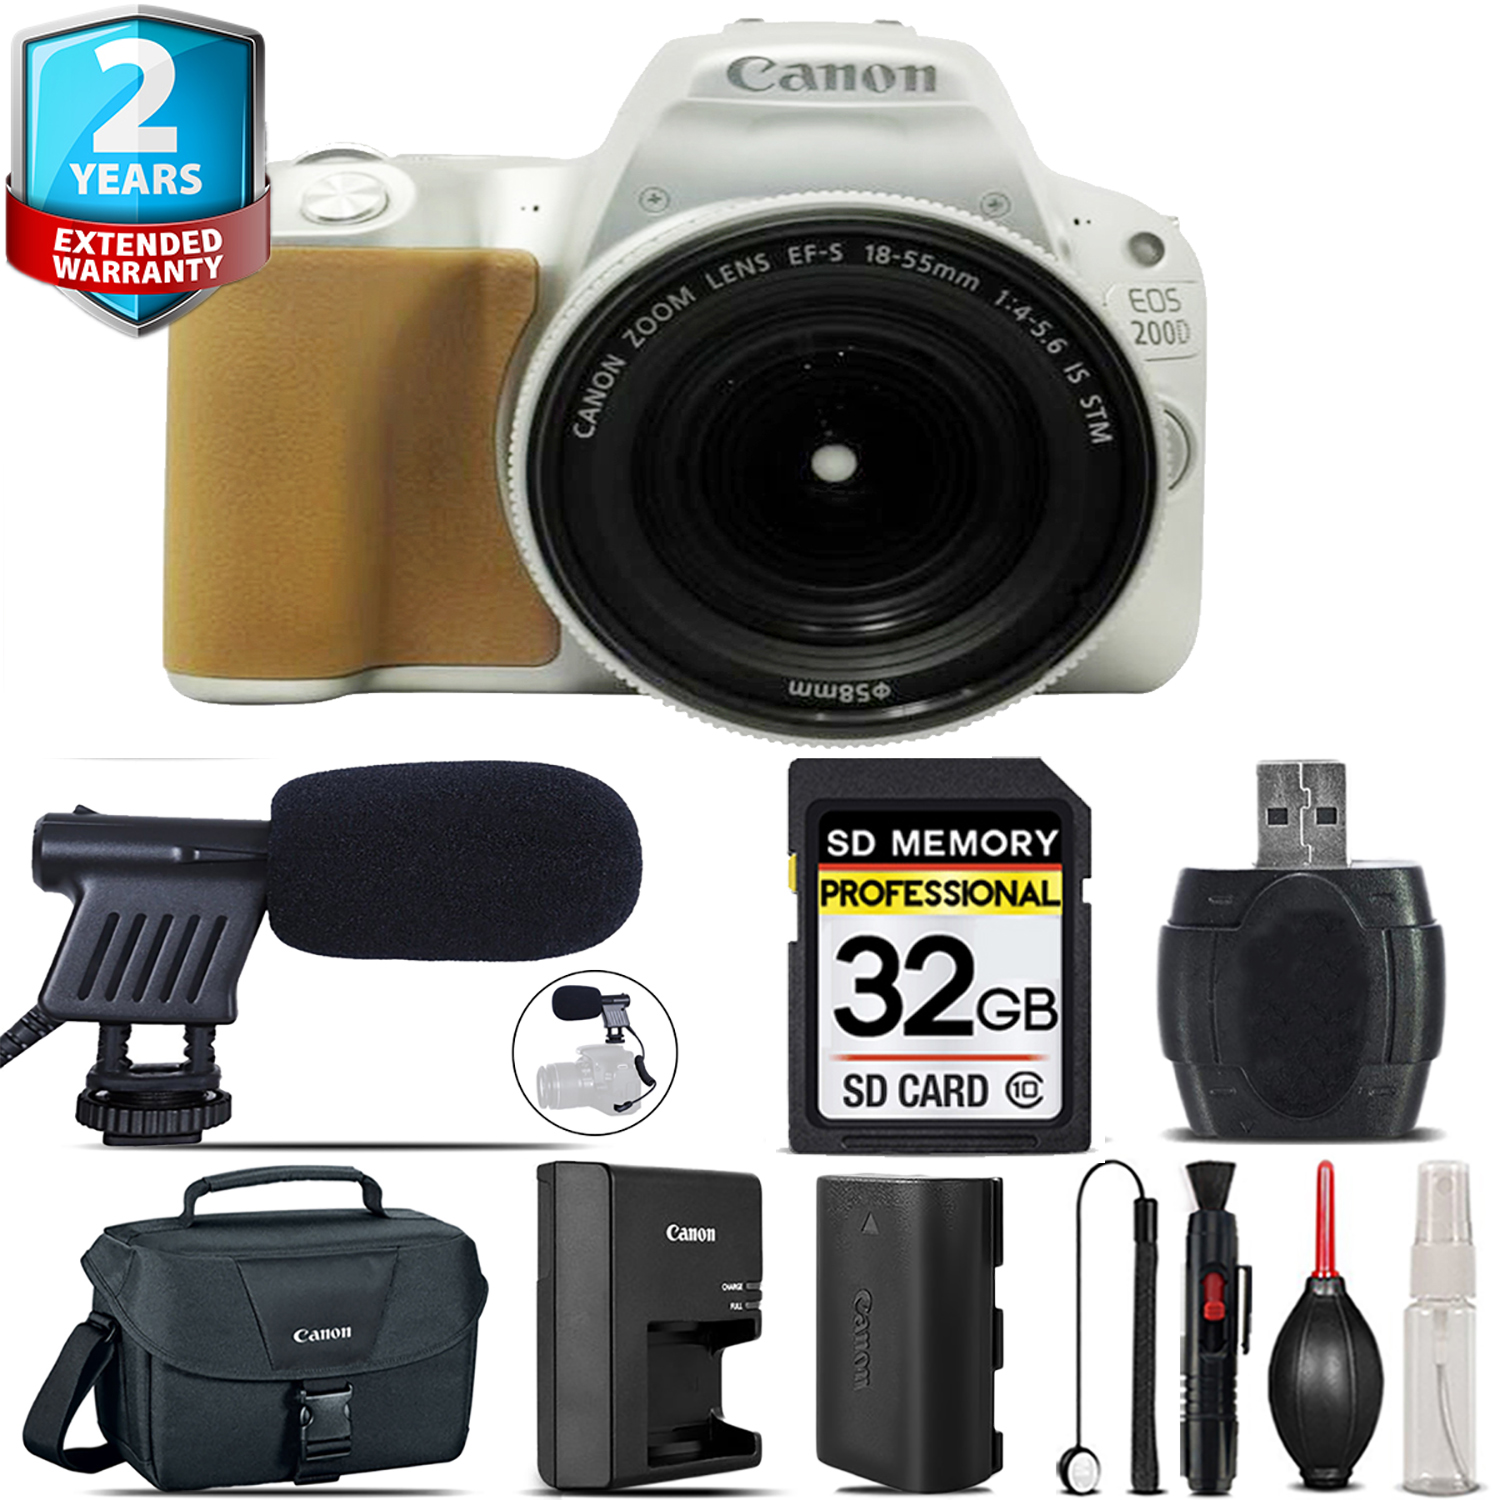 EOS Rebel 200D Camera(Silver) + 18-55mm IS STM + Mic + UV + Case - 32GB Kit *FREE SHIPPING*